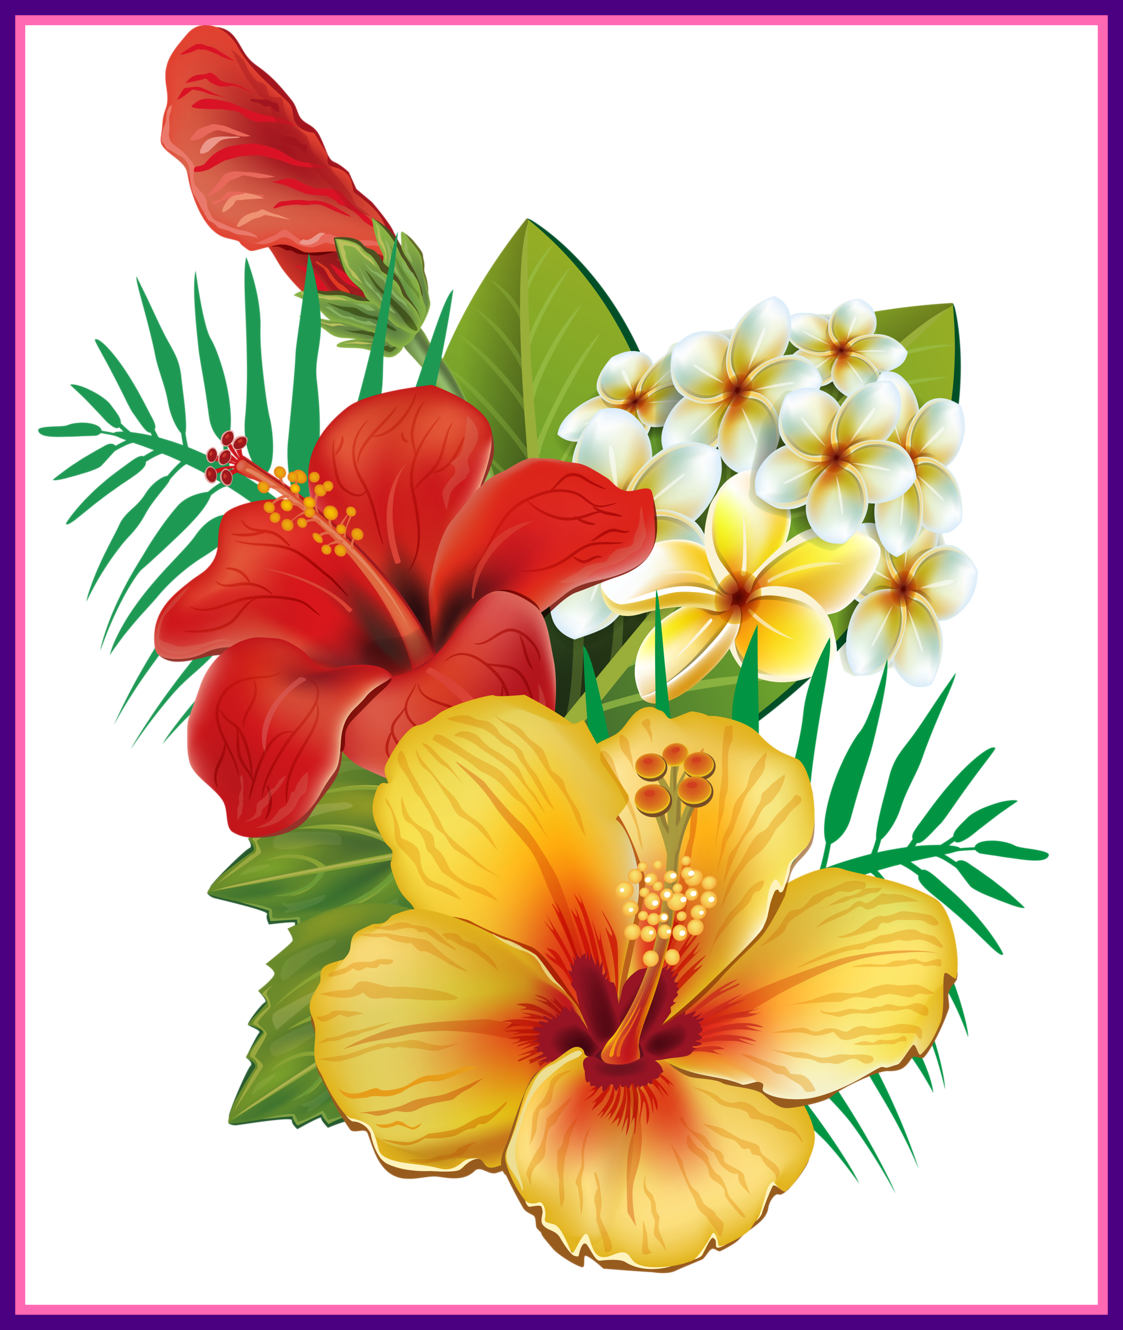 Best Png Flowers Tattoo And Clip Art Pict For Bouquet - Cafepress Tropical Hibiscus Tile Coaster (1123x1330)